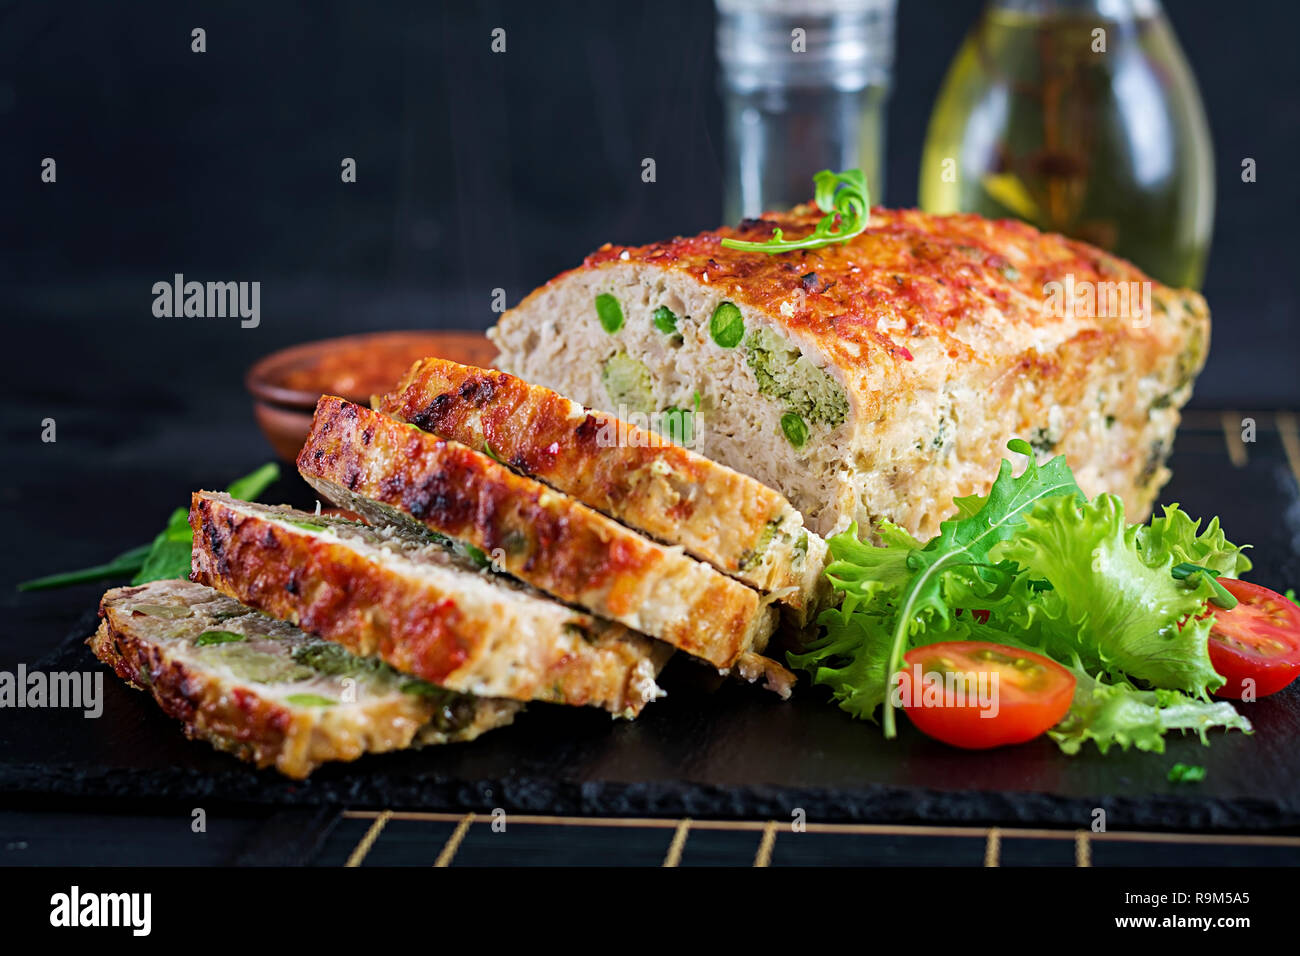 Tasty homemade ground  baked chicken meatloaf with green peas and broccoli on black table. Food american meat loaf. Stock Photo